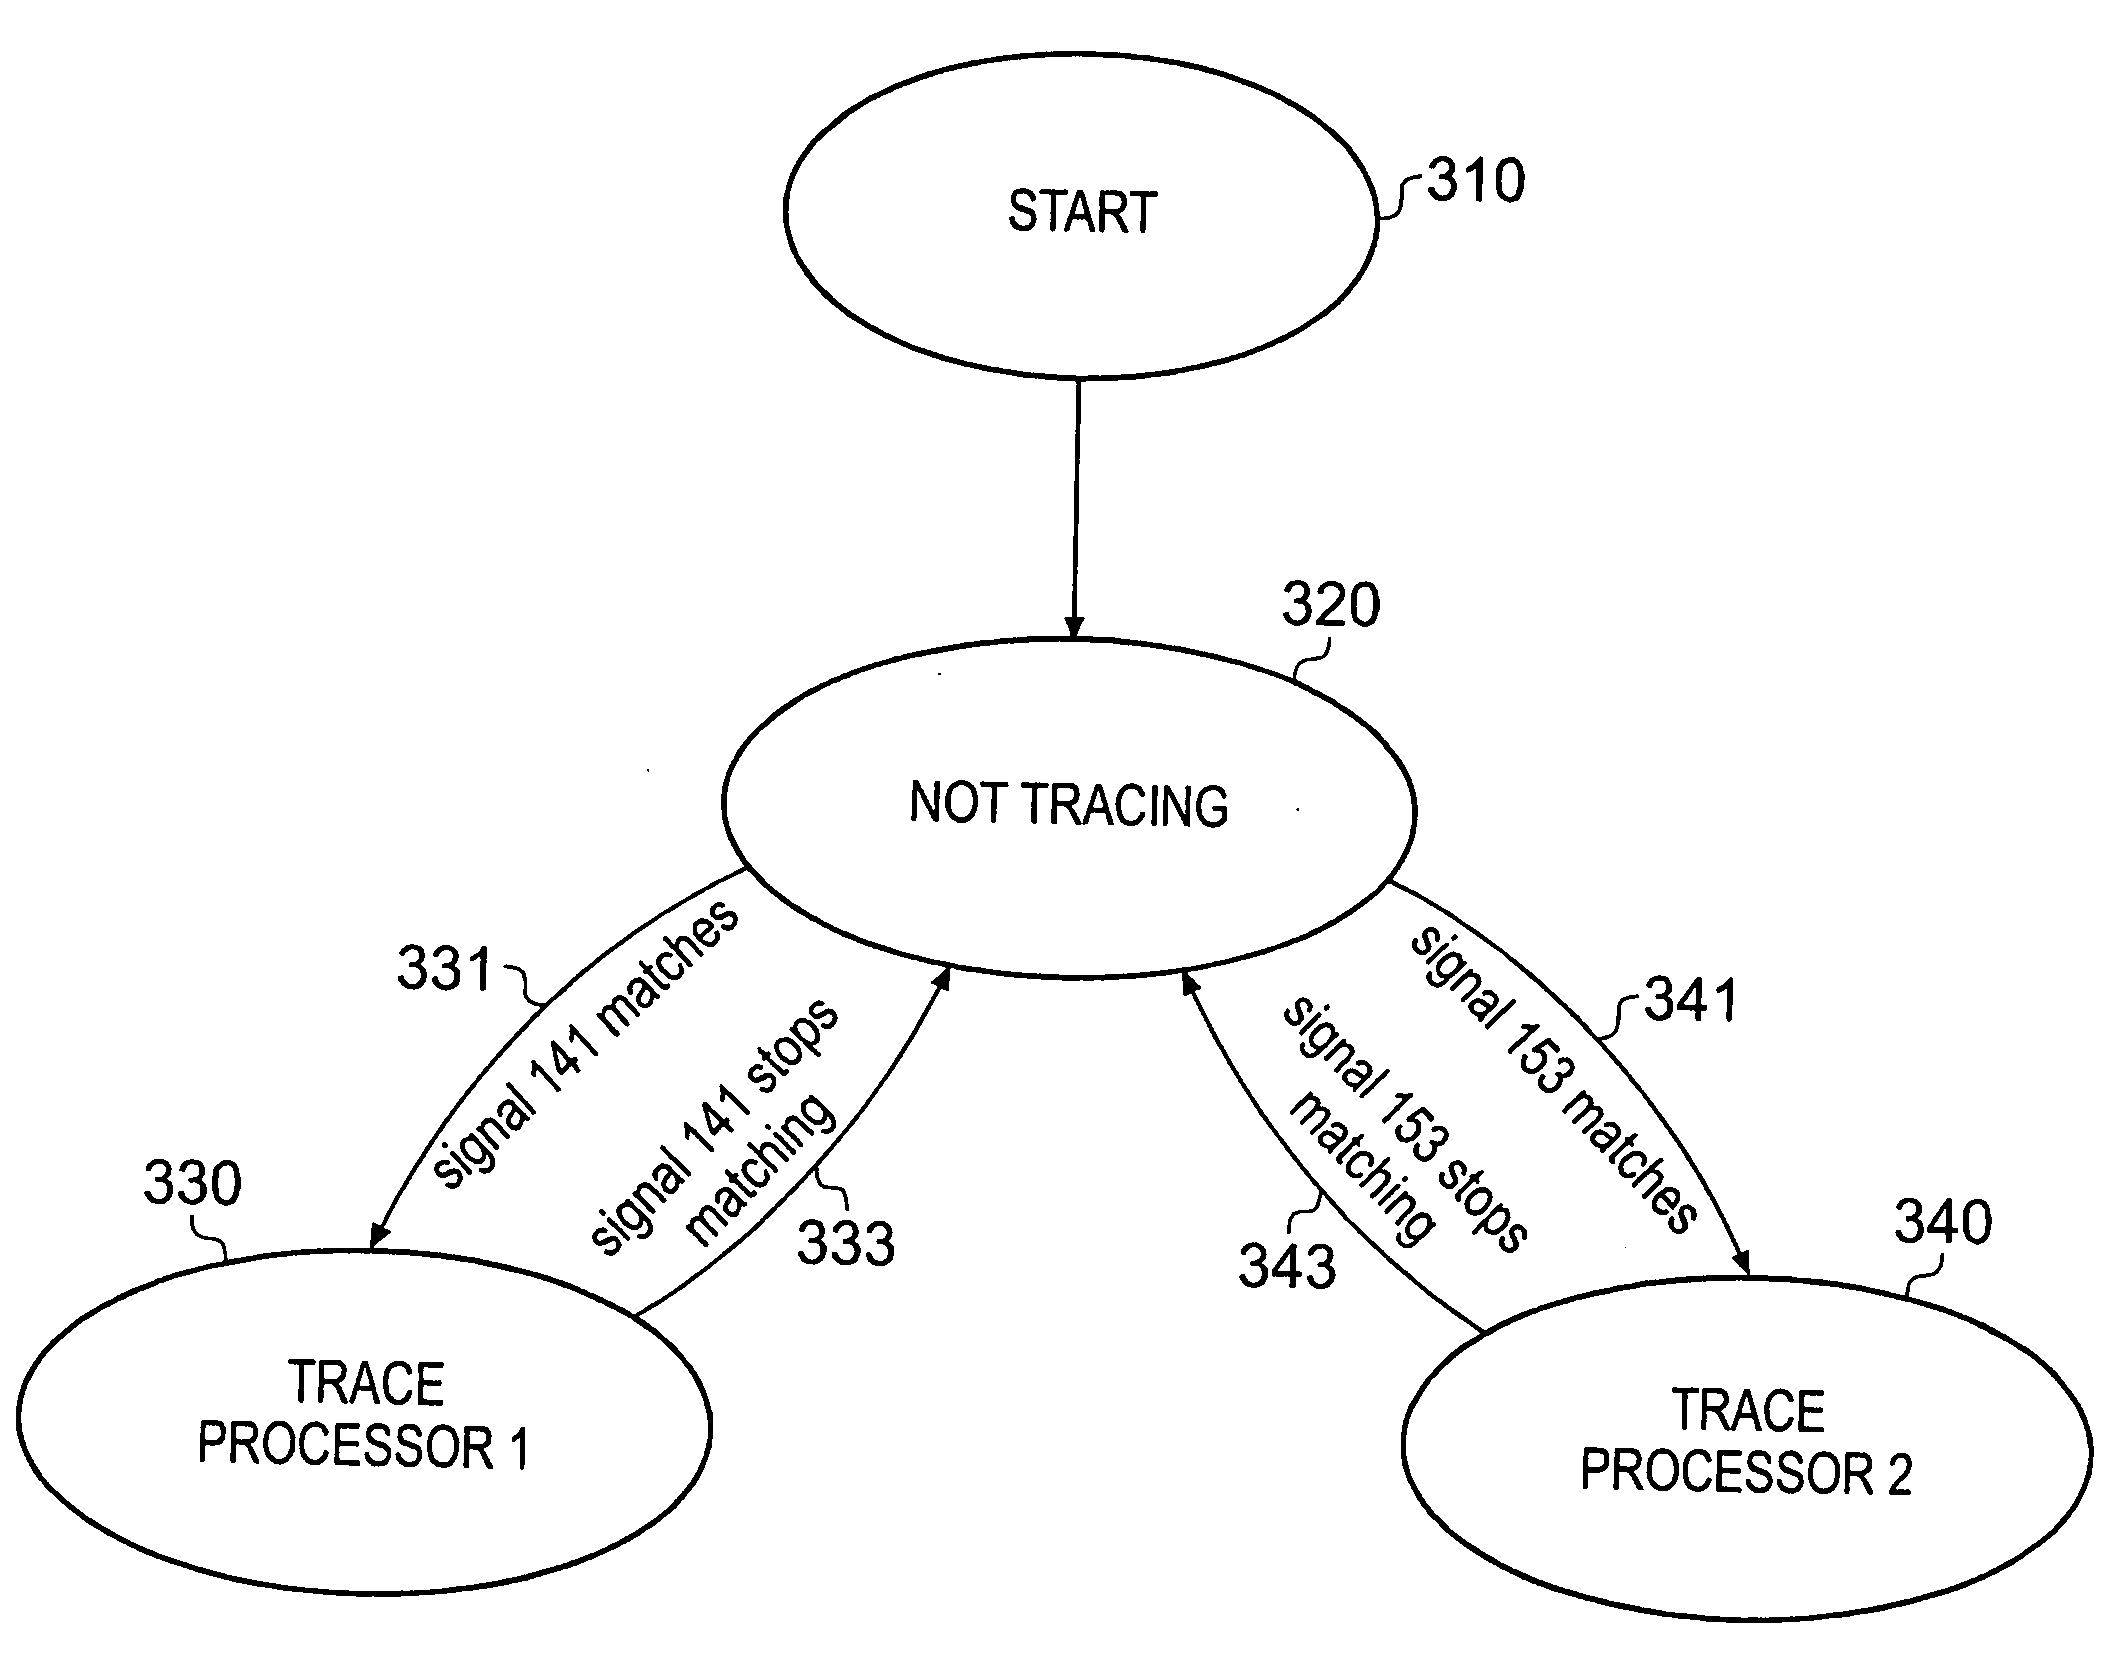 Generation of trace data in a multi-processor system